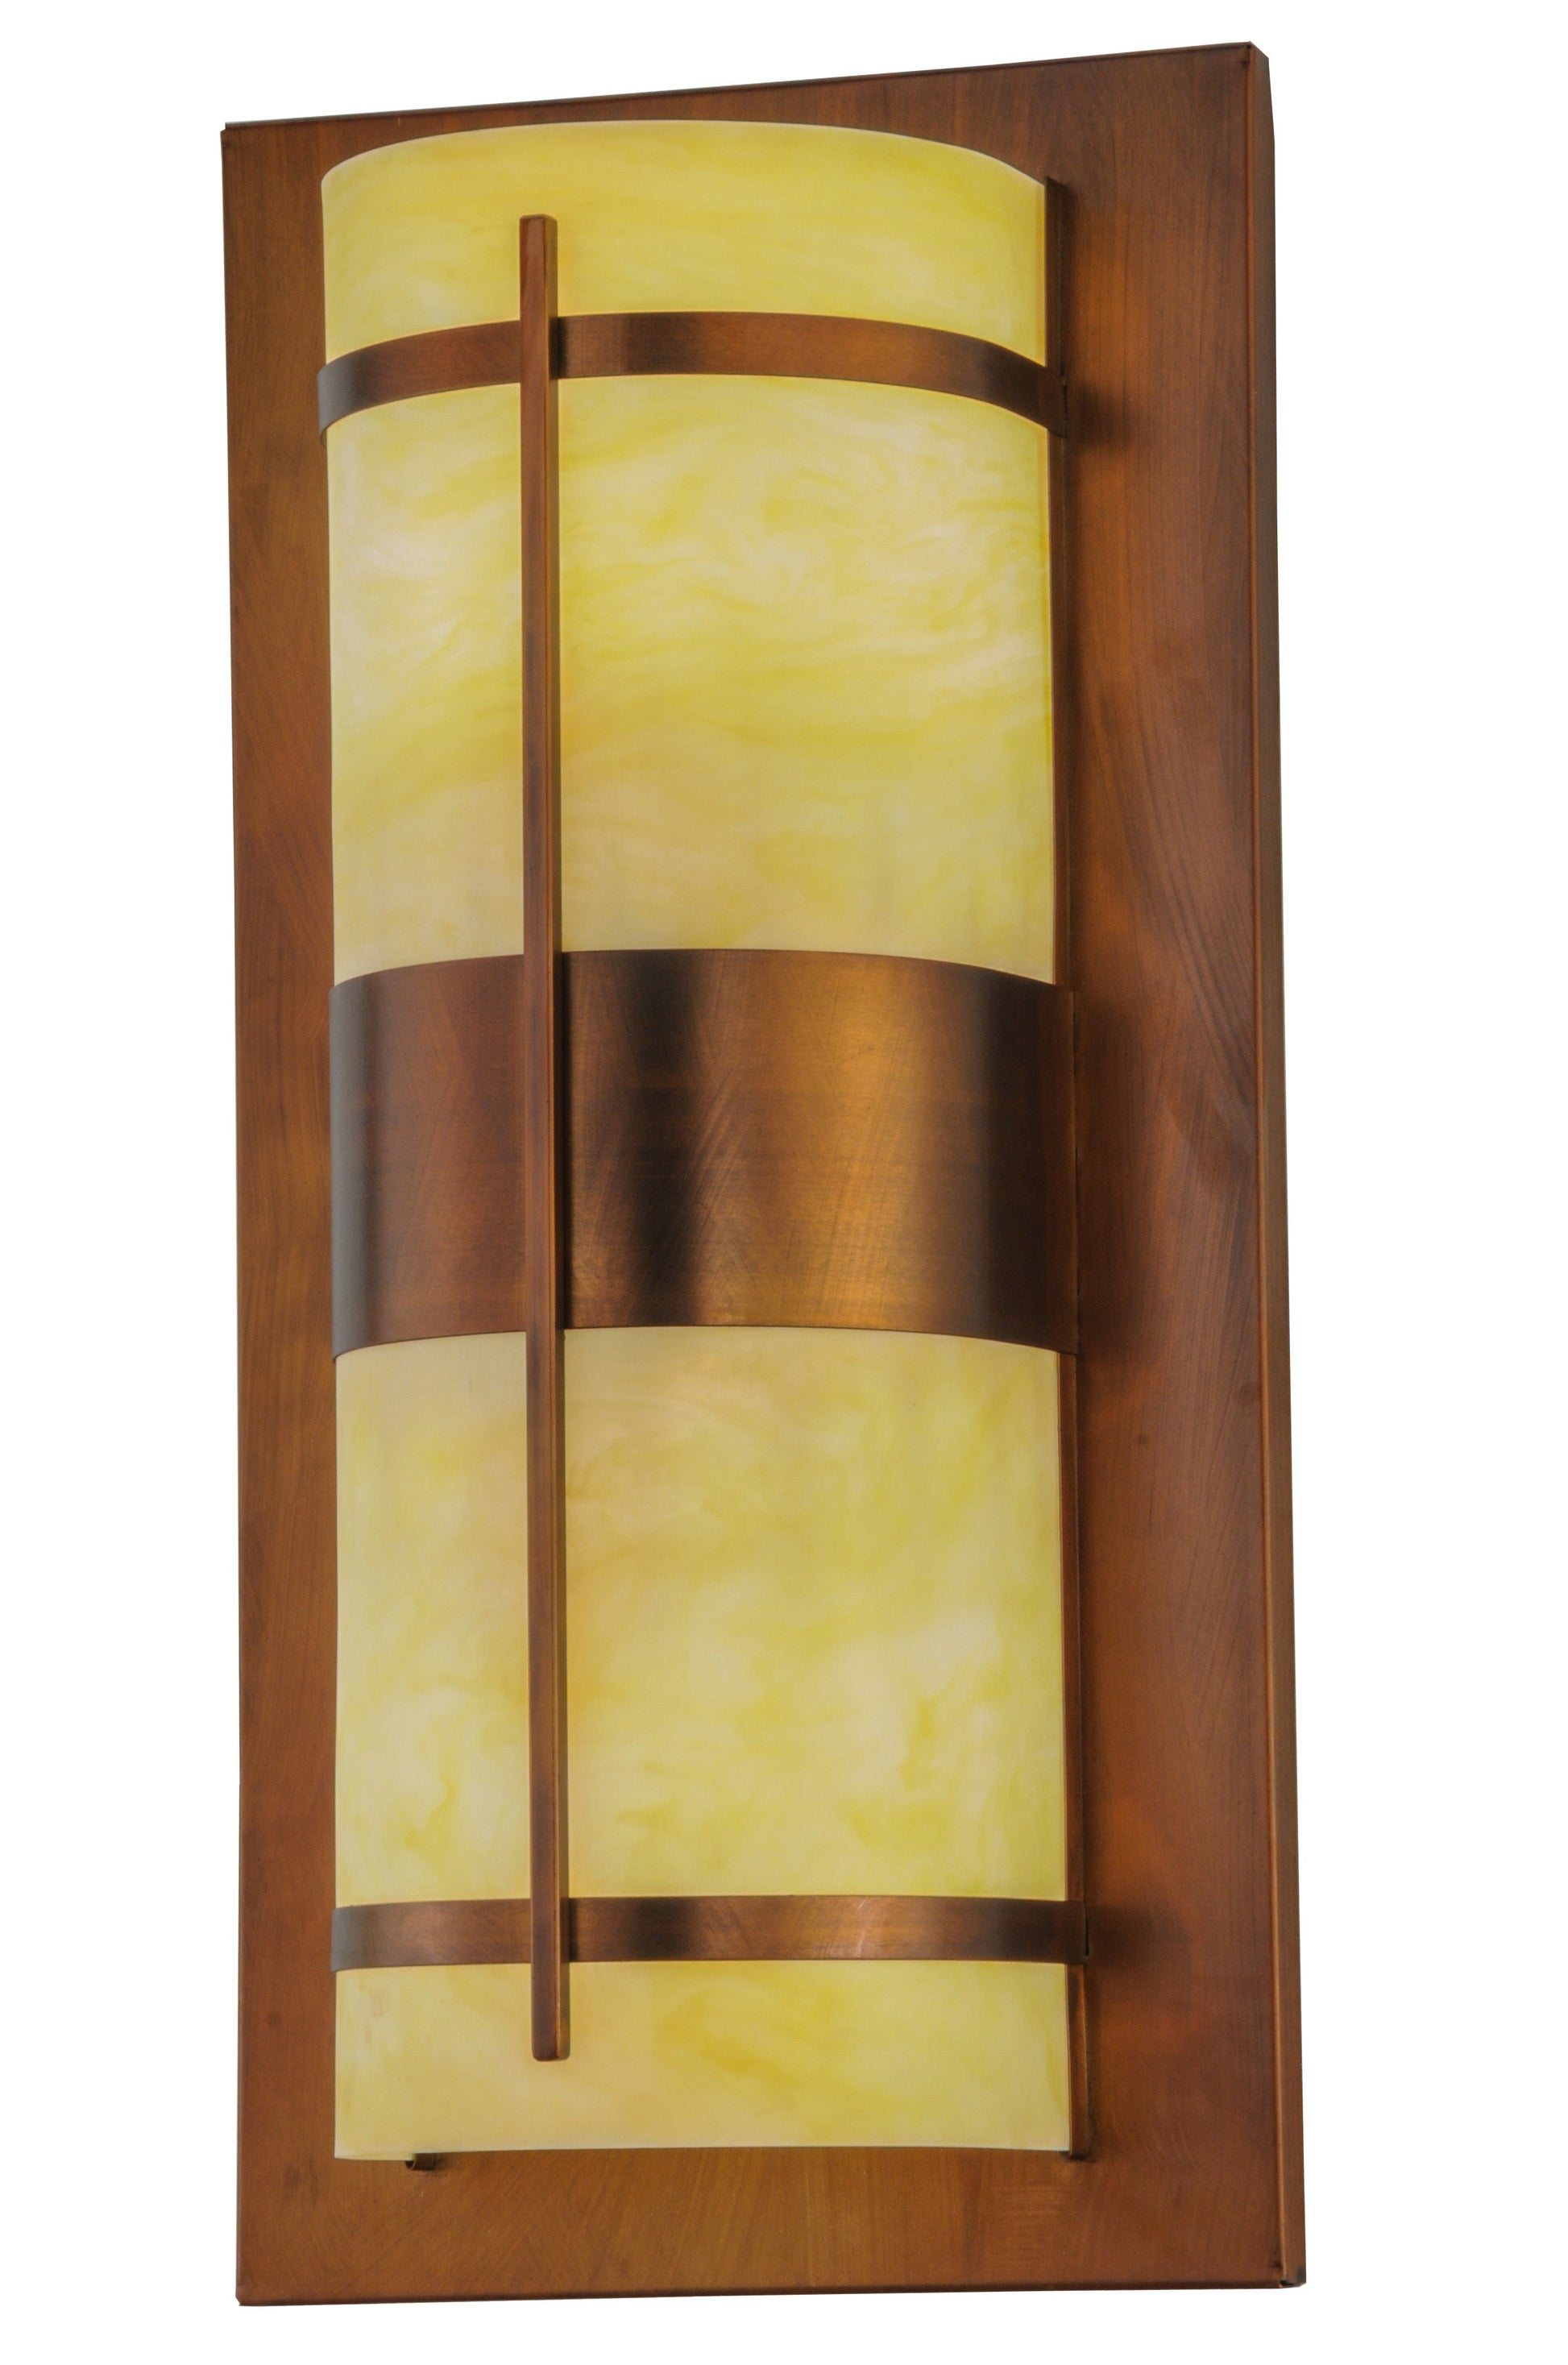 18" Manitowac LED Wall Sconce by 2nd Ave Lighting